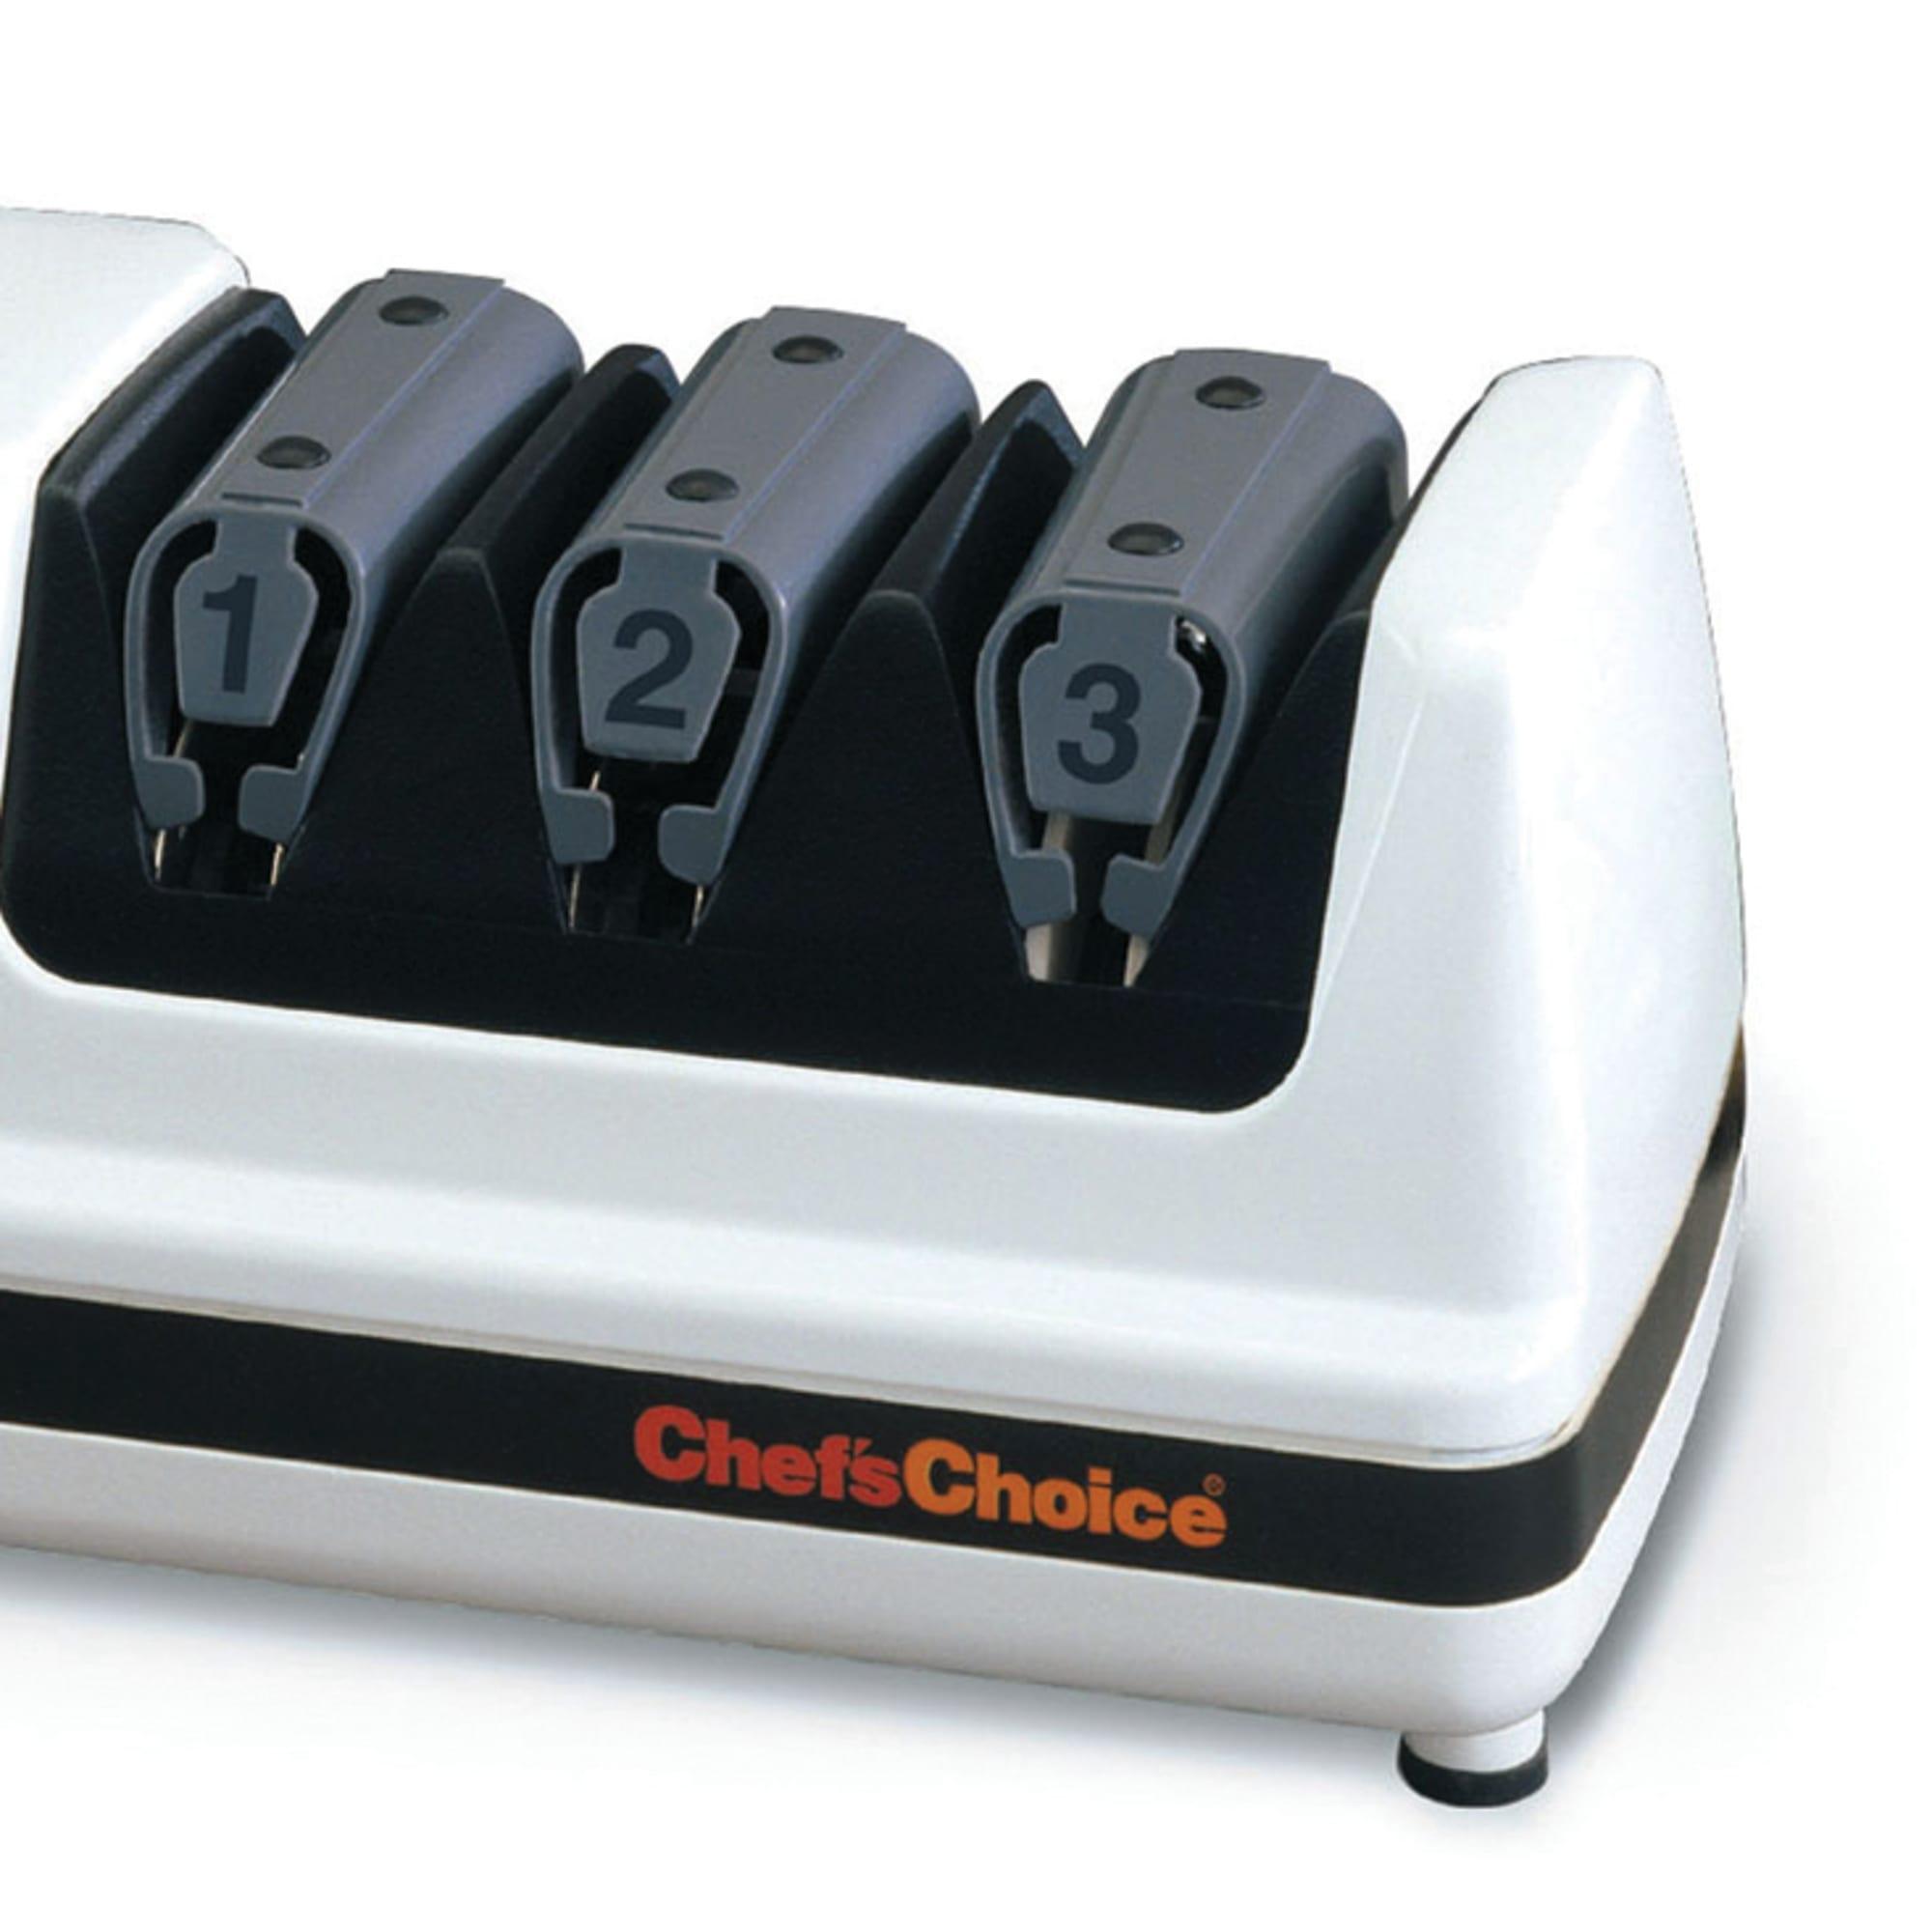 Chef's Choice EdgeSelect 120 Electric Knife Sharpener Image 3